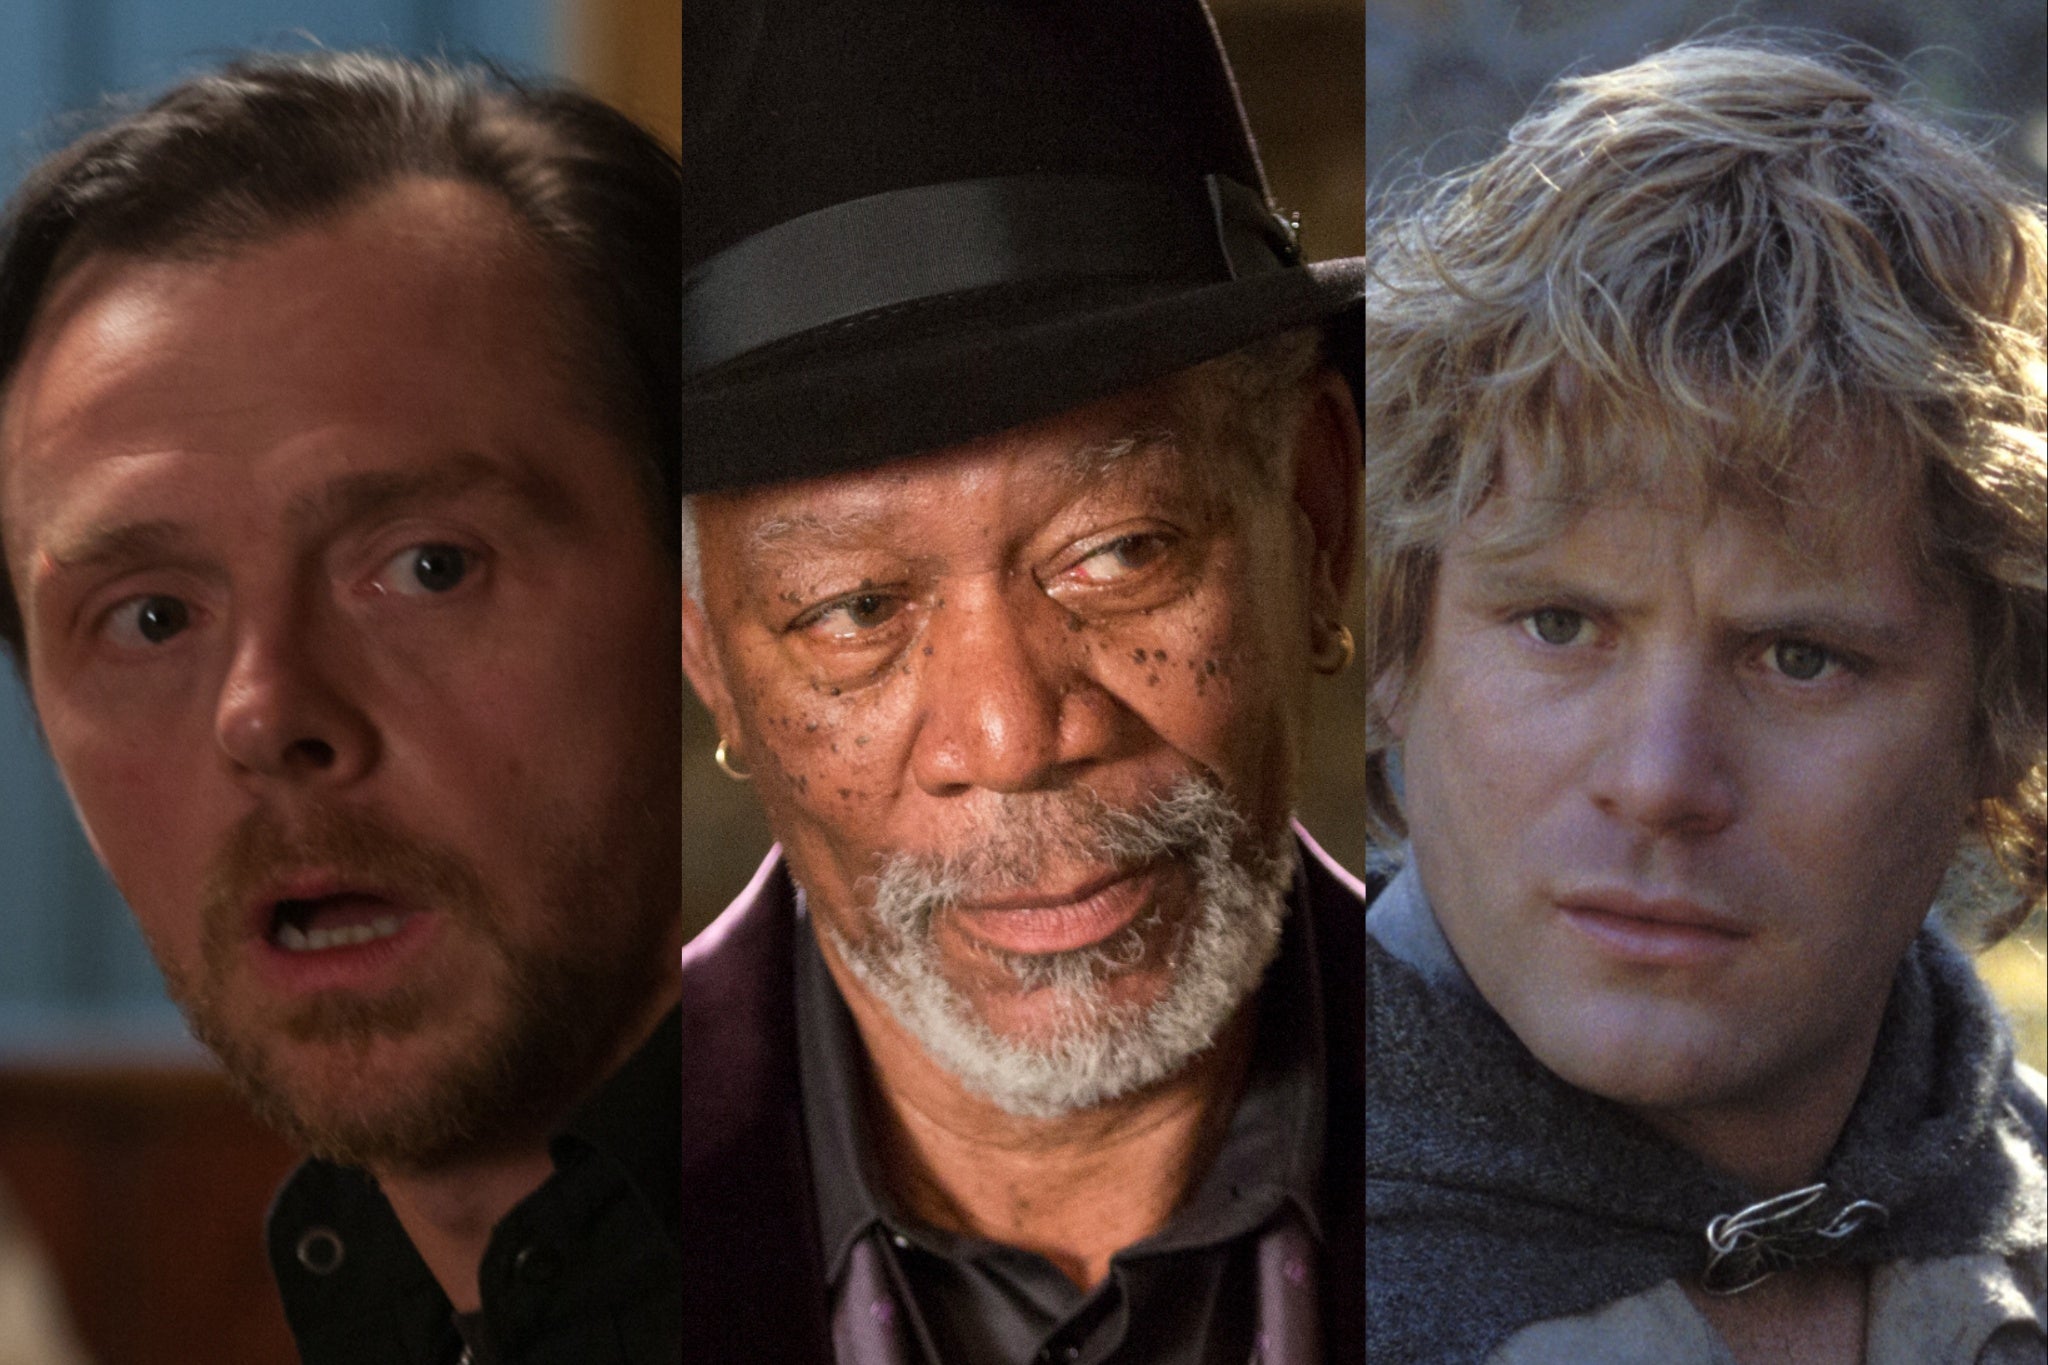 <p>Simon Pegg in ‘The World’s End’, Morgan Freeman in ‘Now You See Me’, and Sean Aston in ‘Return of the King'</p>